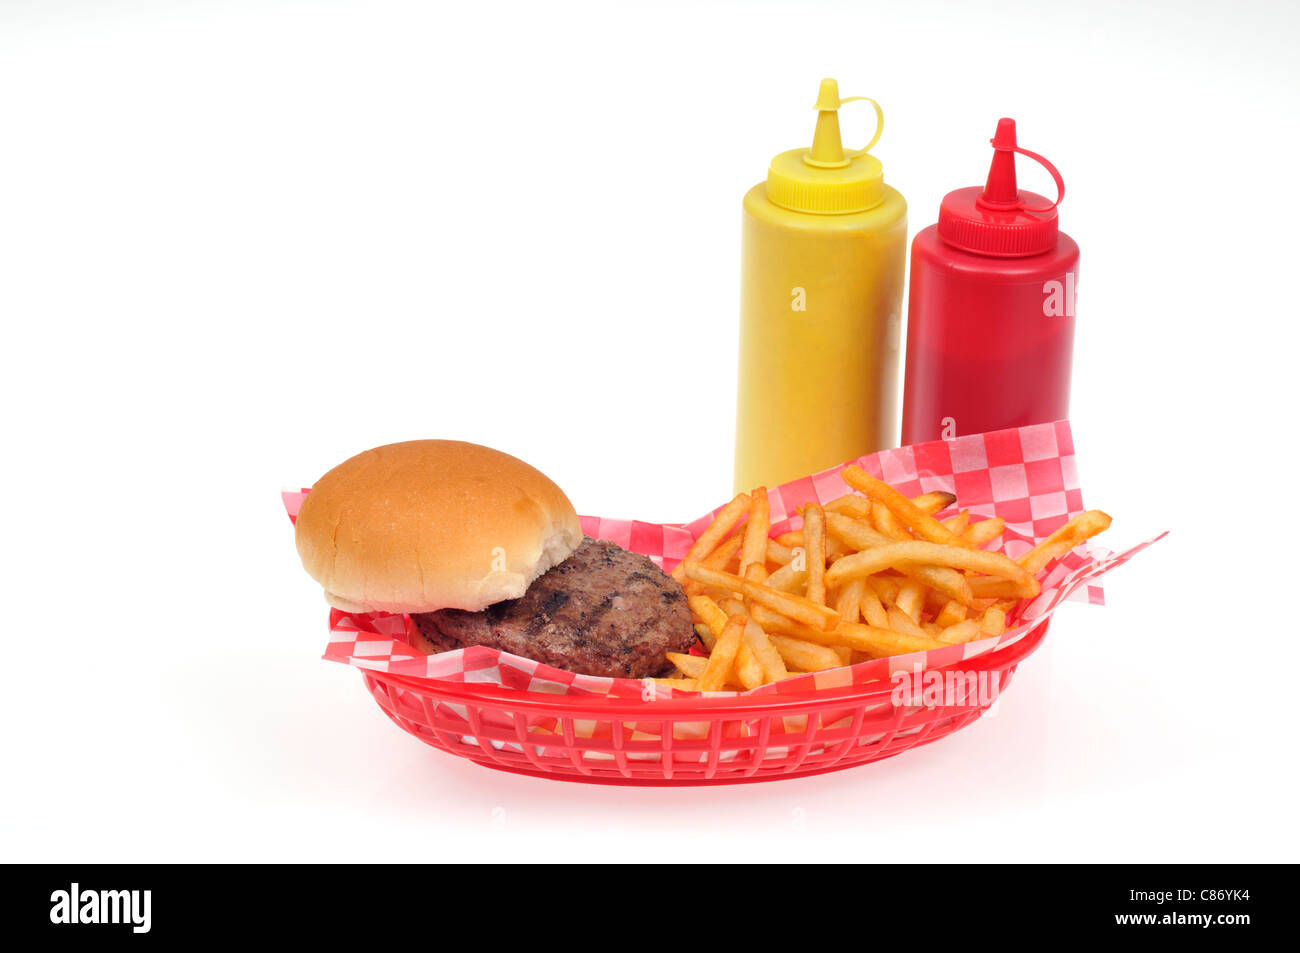 Hamburger with french fries in a red plastic retro basket with mustard and ketchup condiments on white background, cutout. USA Stock Photo